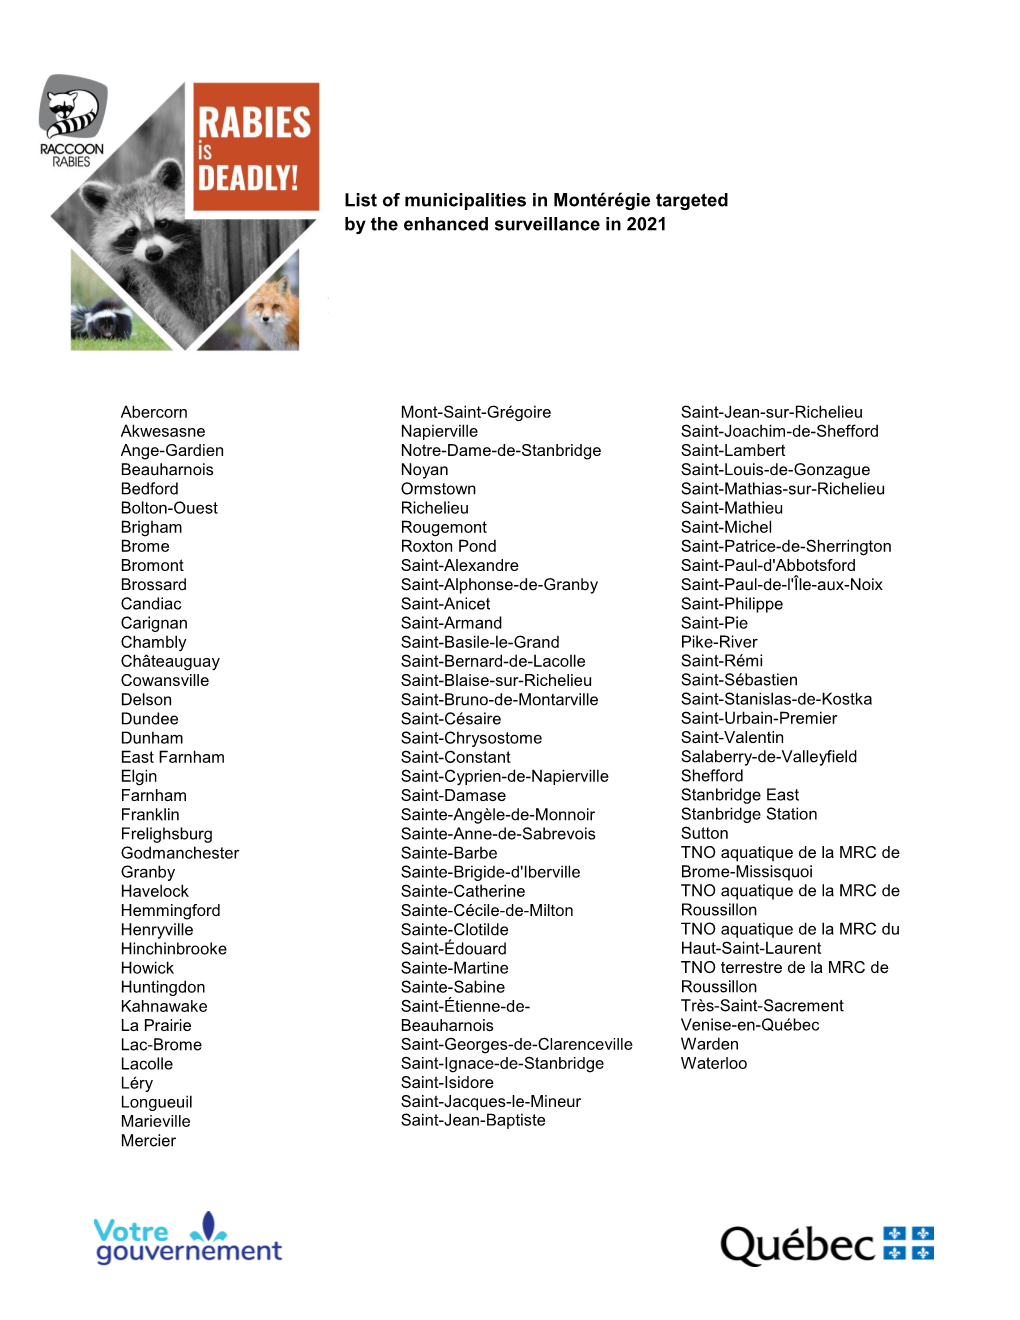 List of Municipalities Targeted by the Enhanced Surveillance in 2021